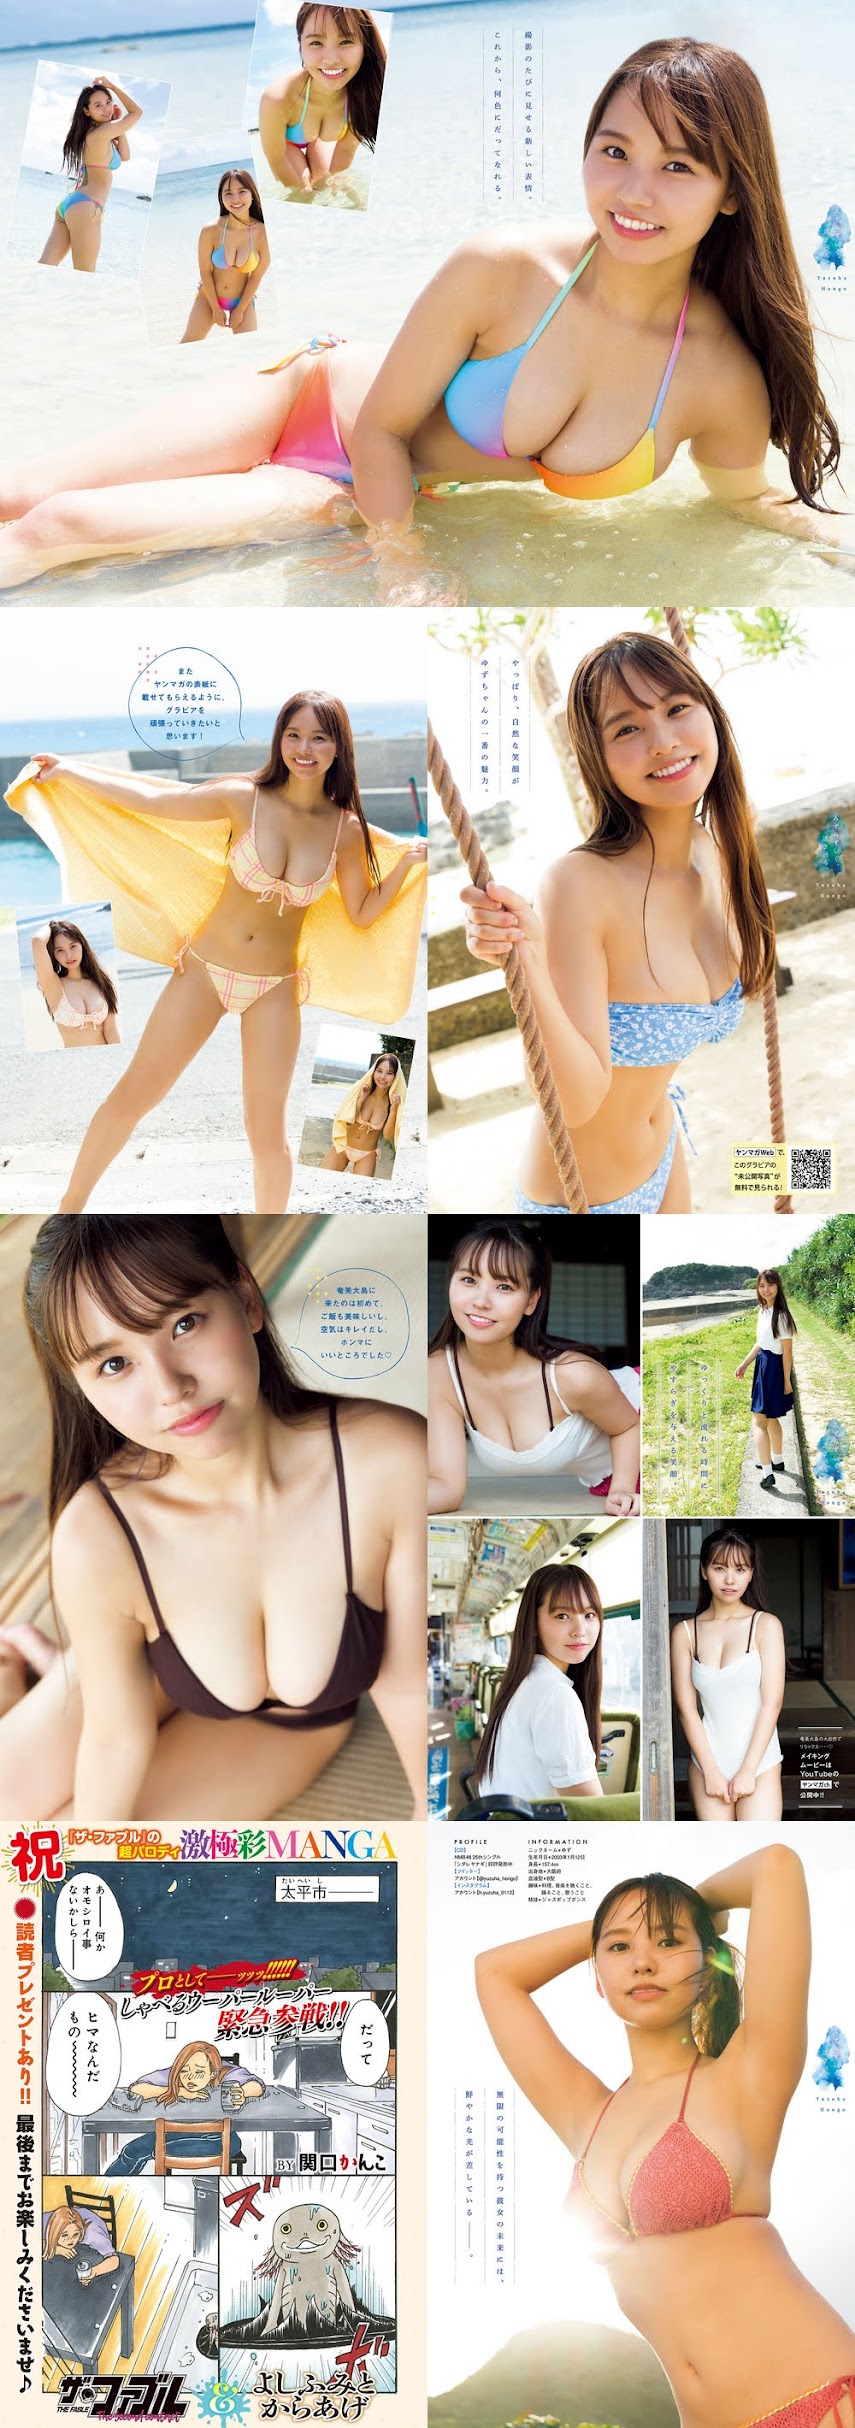 [Young Magazine] 2021 No.50 (本郷柚巴 他)   P214357 young-magazine 12190 